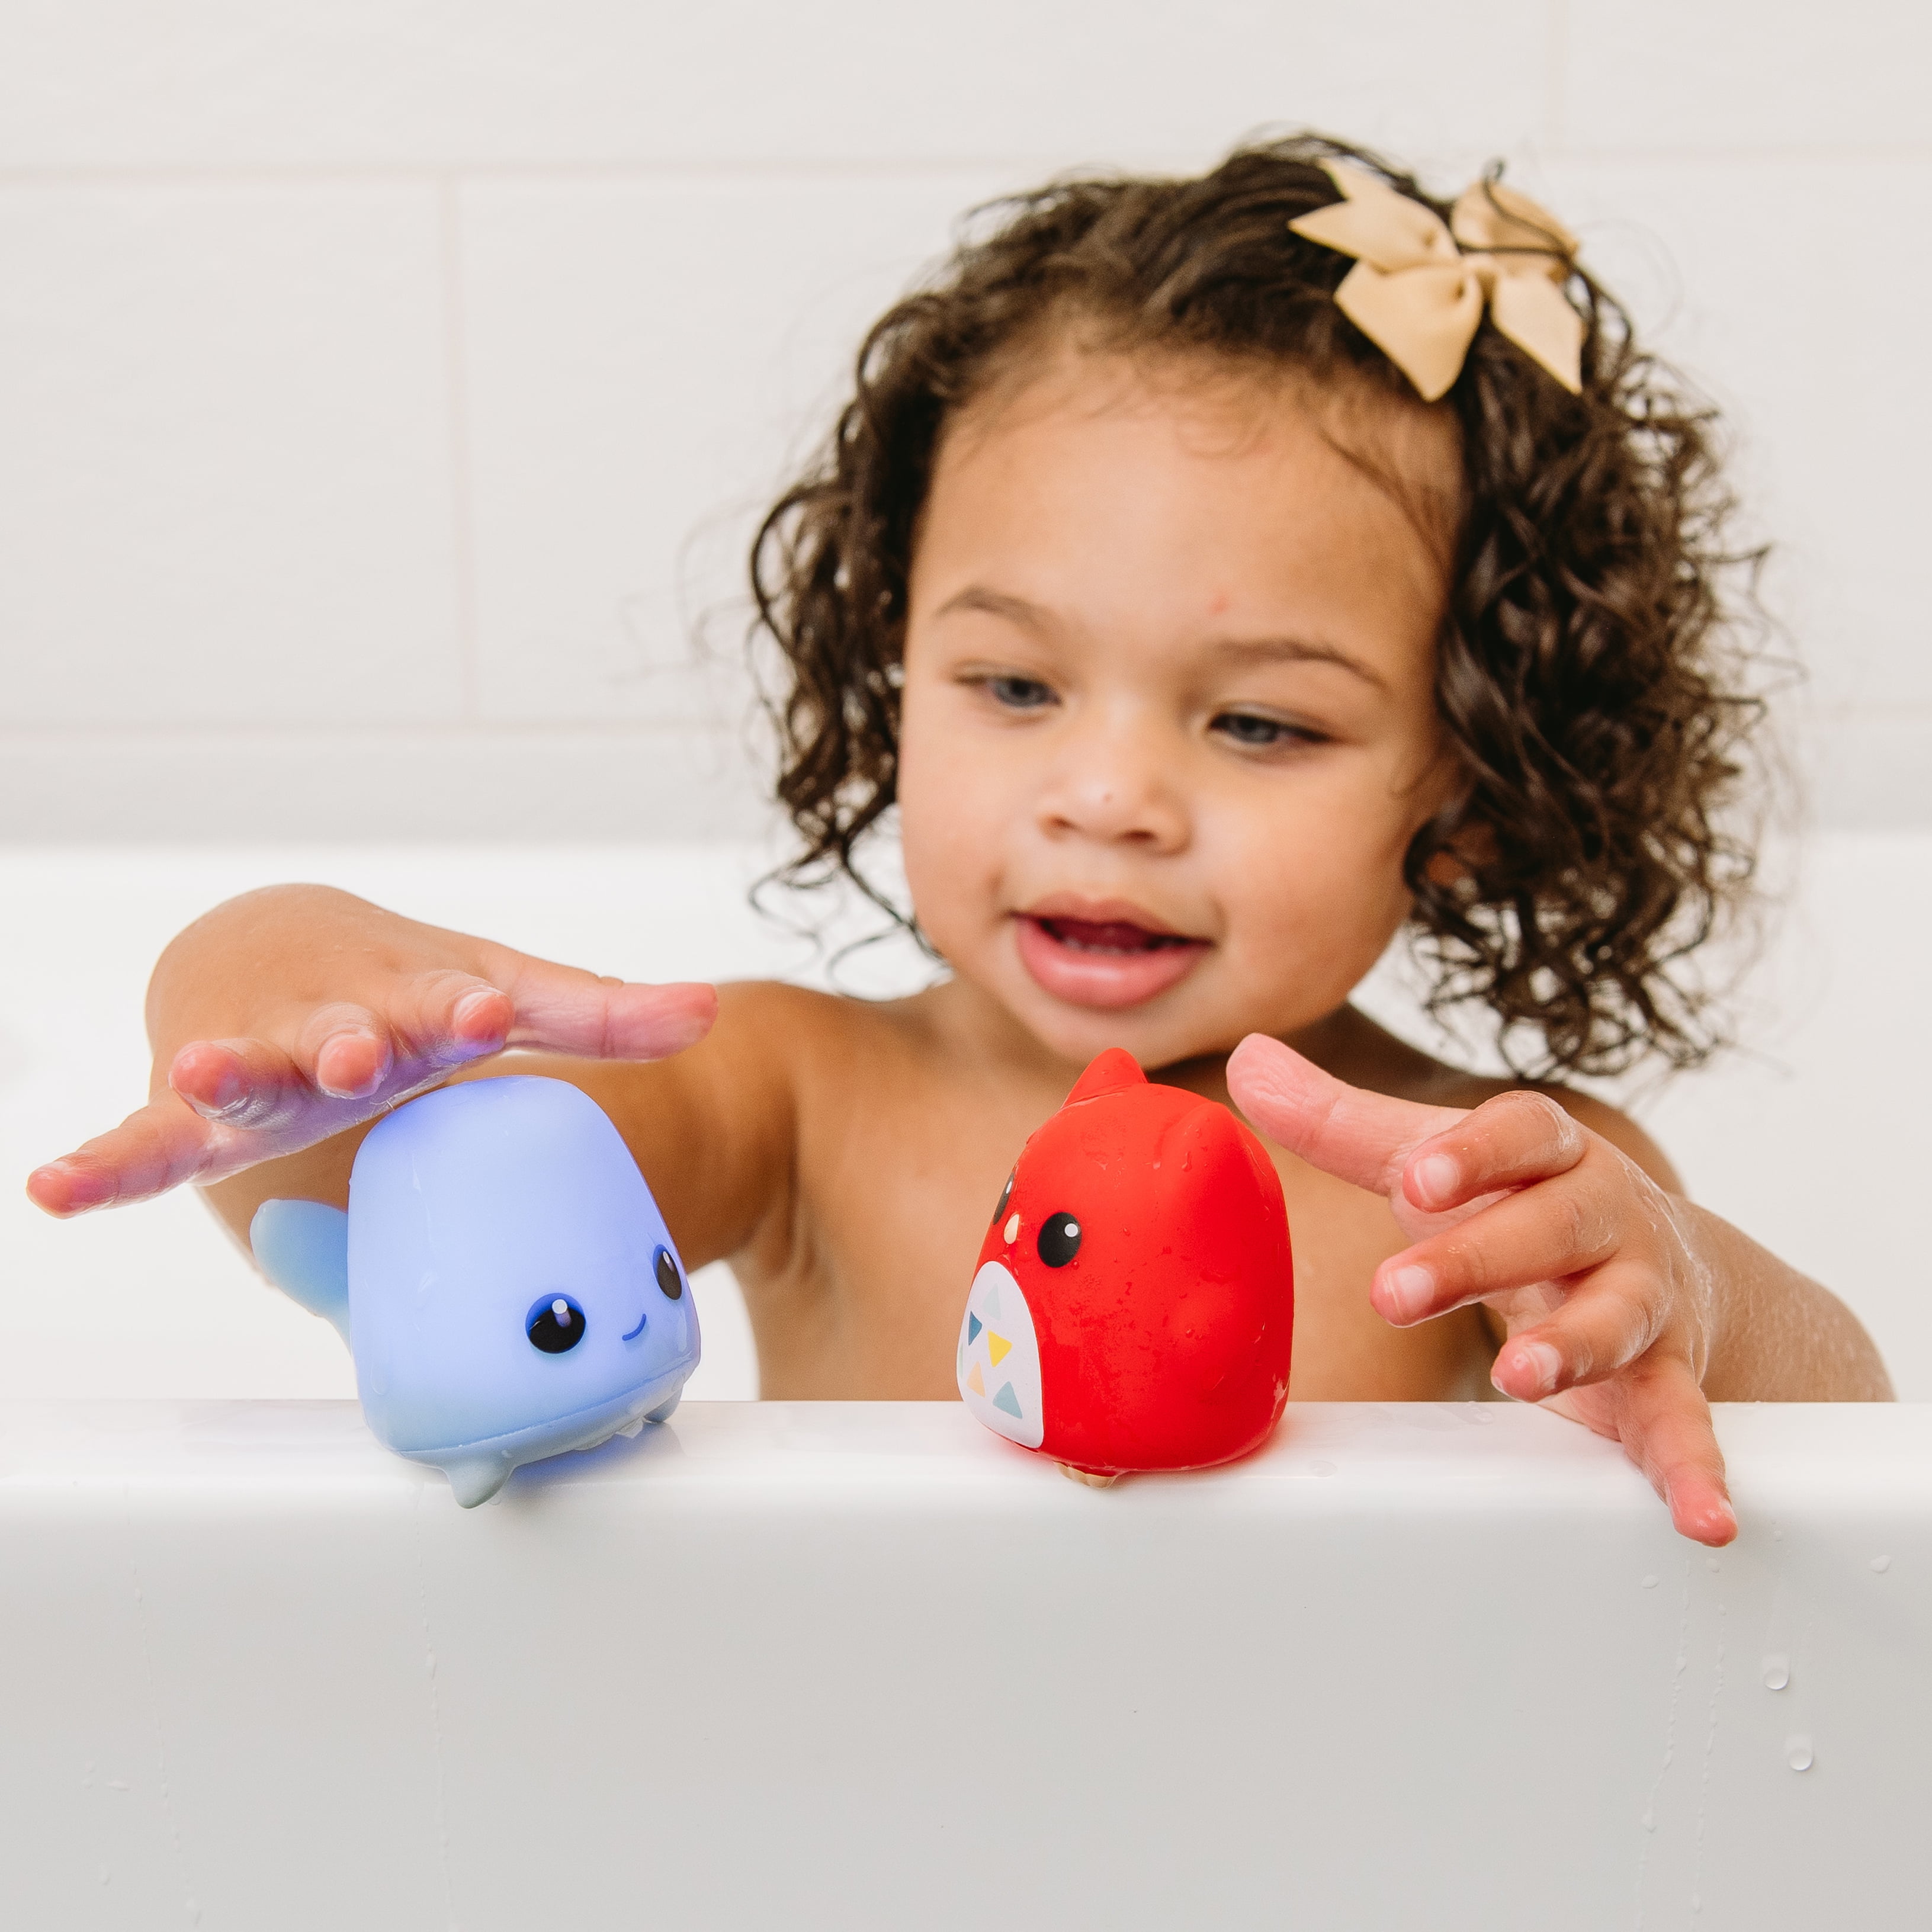 Hopscotch Lane Whale Light Up Fountain Bath Toy | Baby and Toddler 6 Months and Older, Unisex